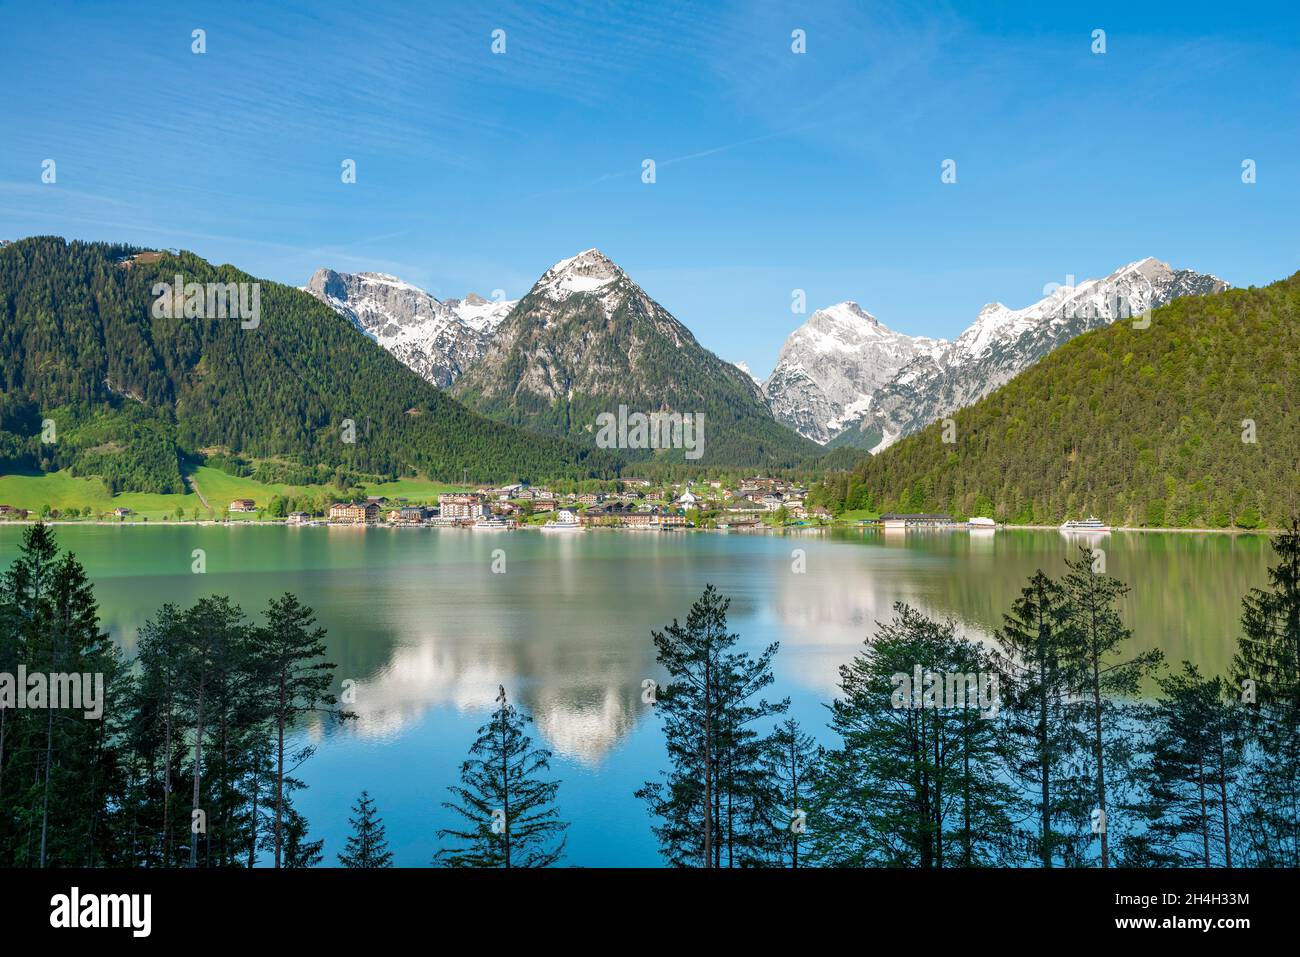 View of Pertisau over Lake Achensee, in the background mountains Dristenkopf and Falzthurnjoch with snow in spring, Achensee, Tyrol, Austria Stock Photo